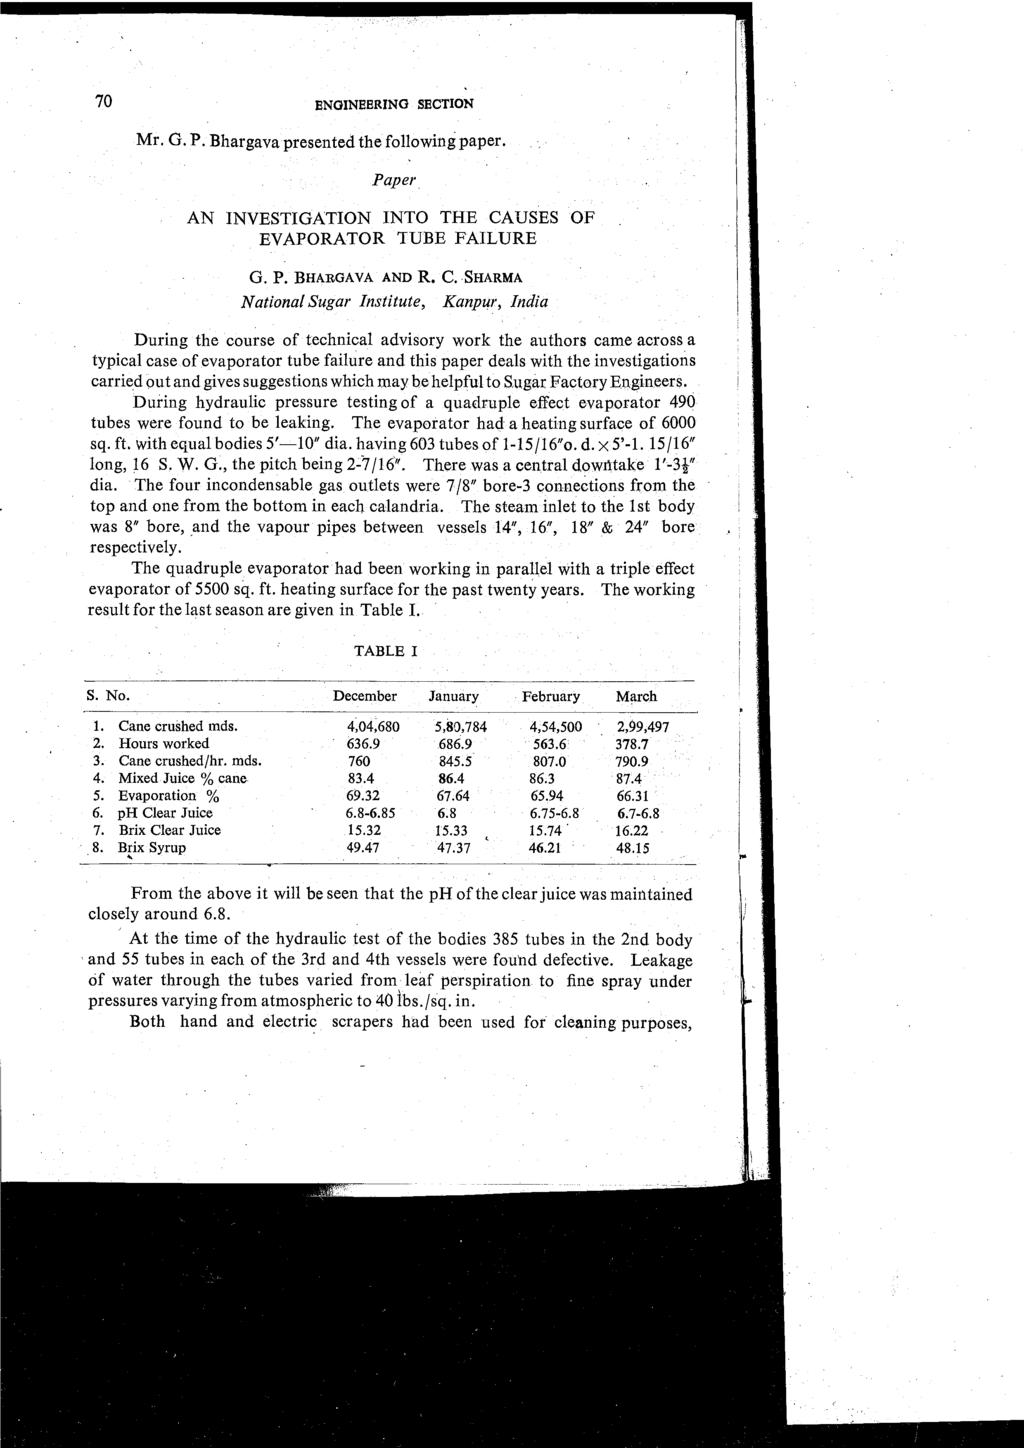 70 BNOINEERINO SECTION Mr. G. P. Bhargava presented the following paper. Paper AN INVESTIGATION INTO THE CA